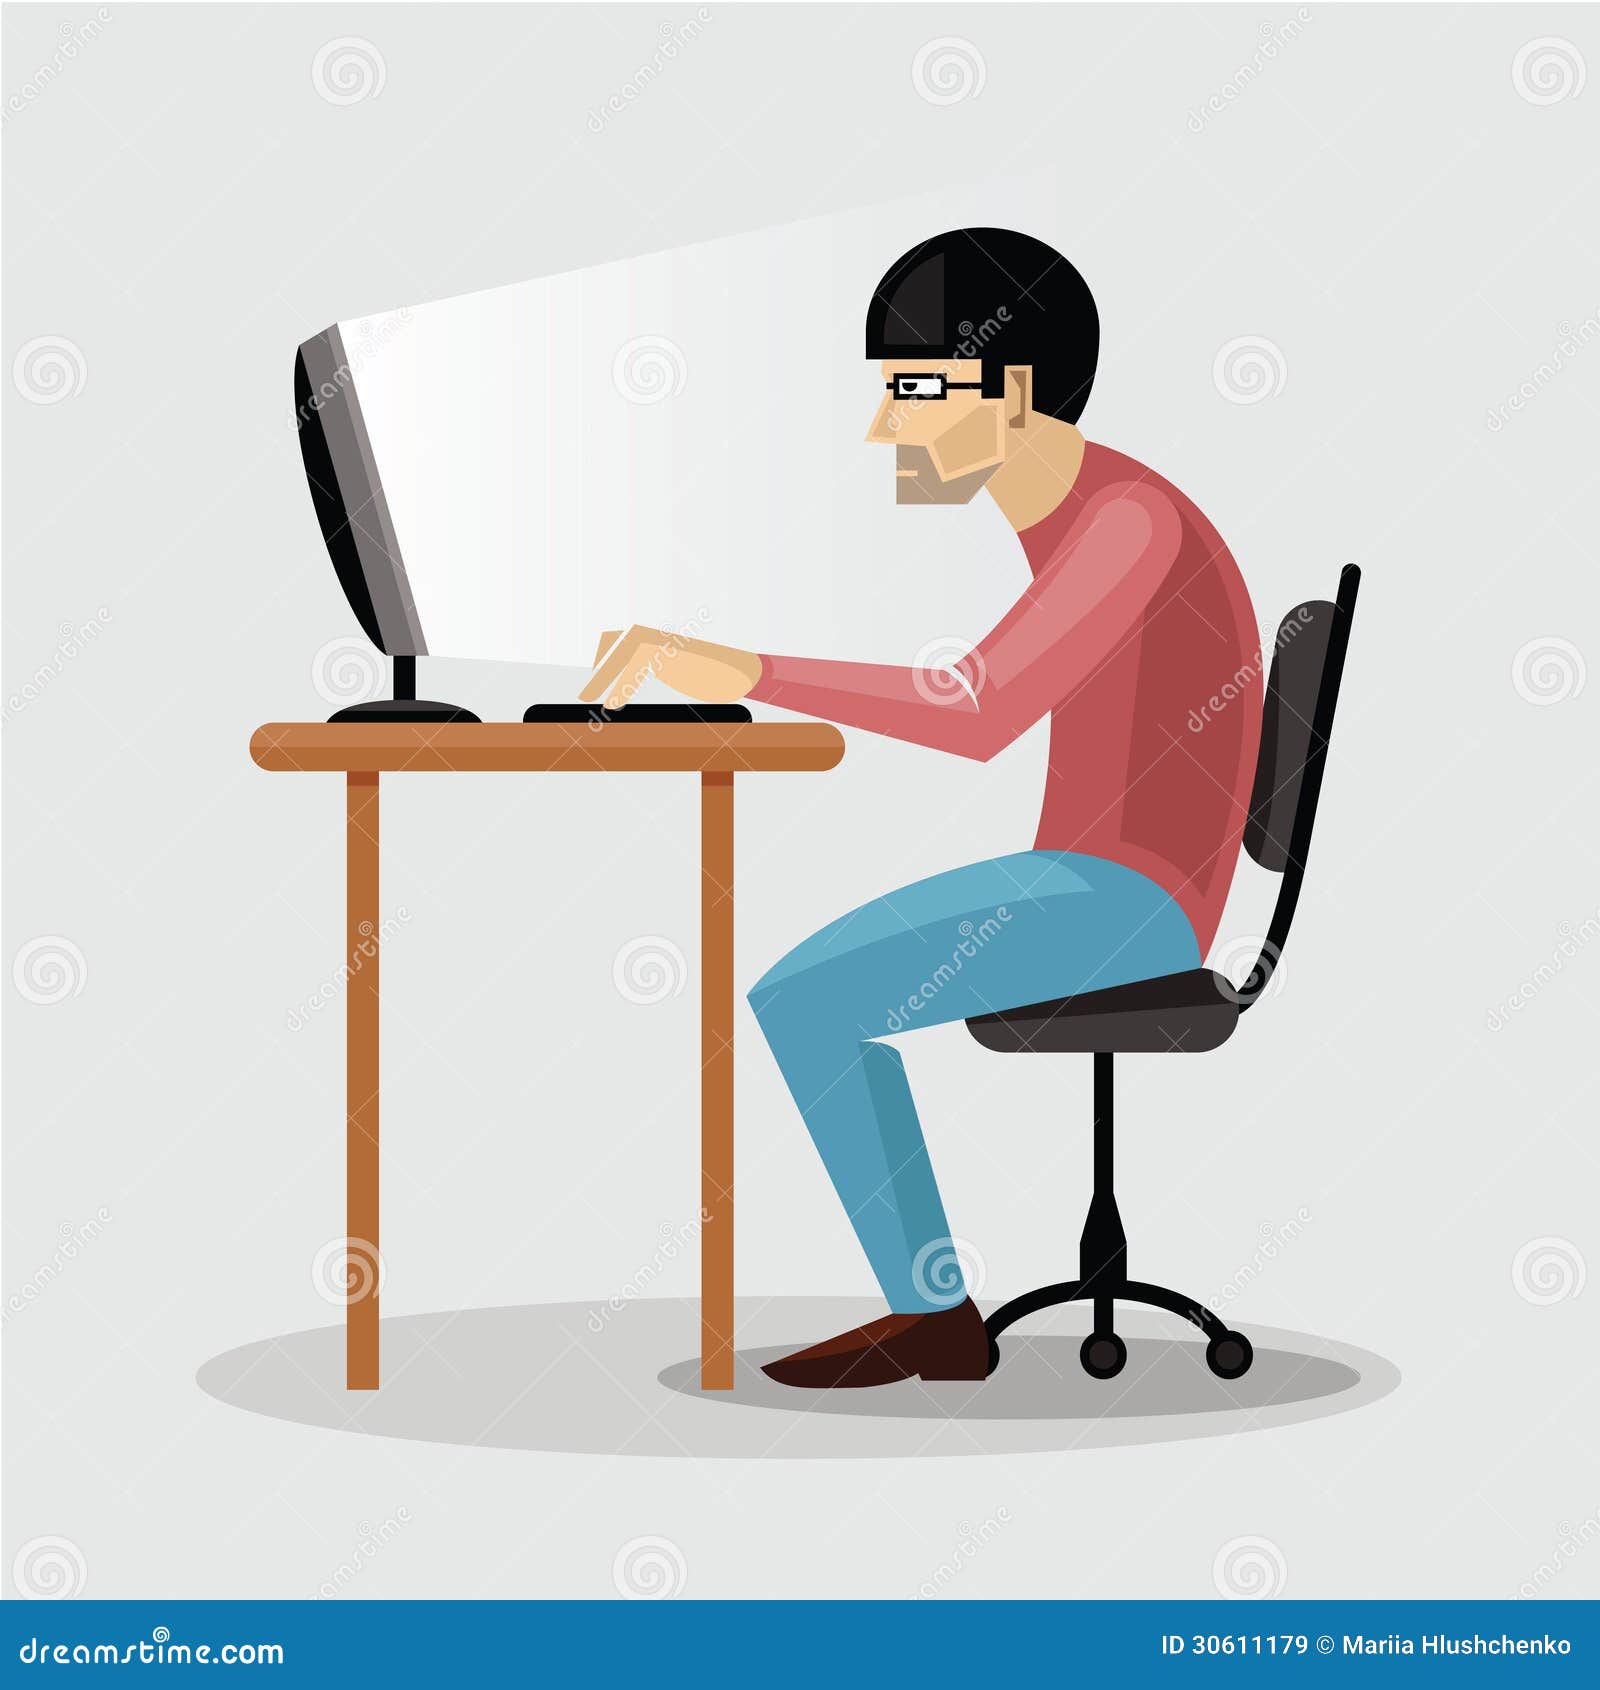 Man Working On Computer Royalty Free Stock Images - Image 